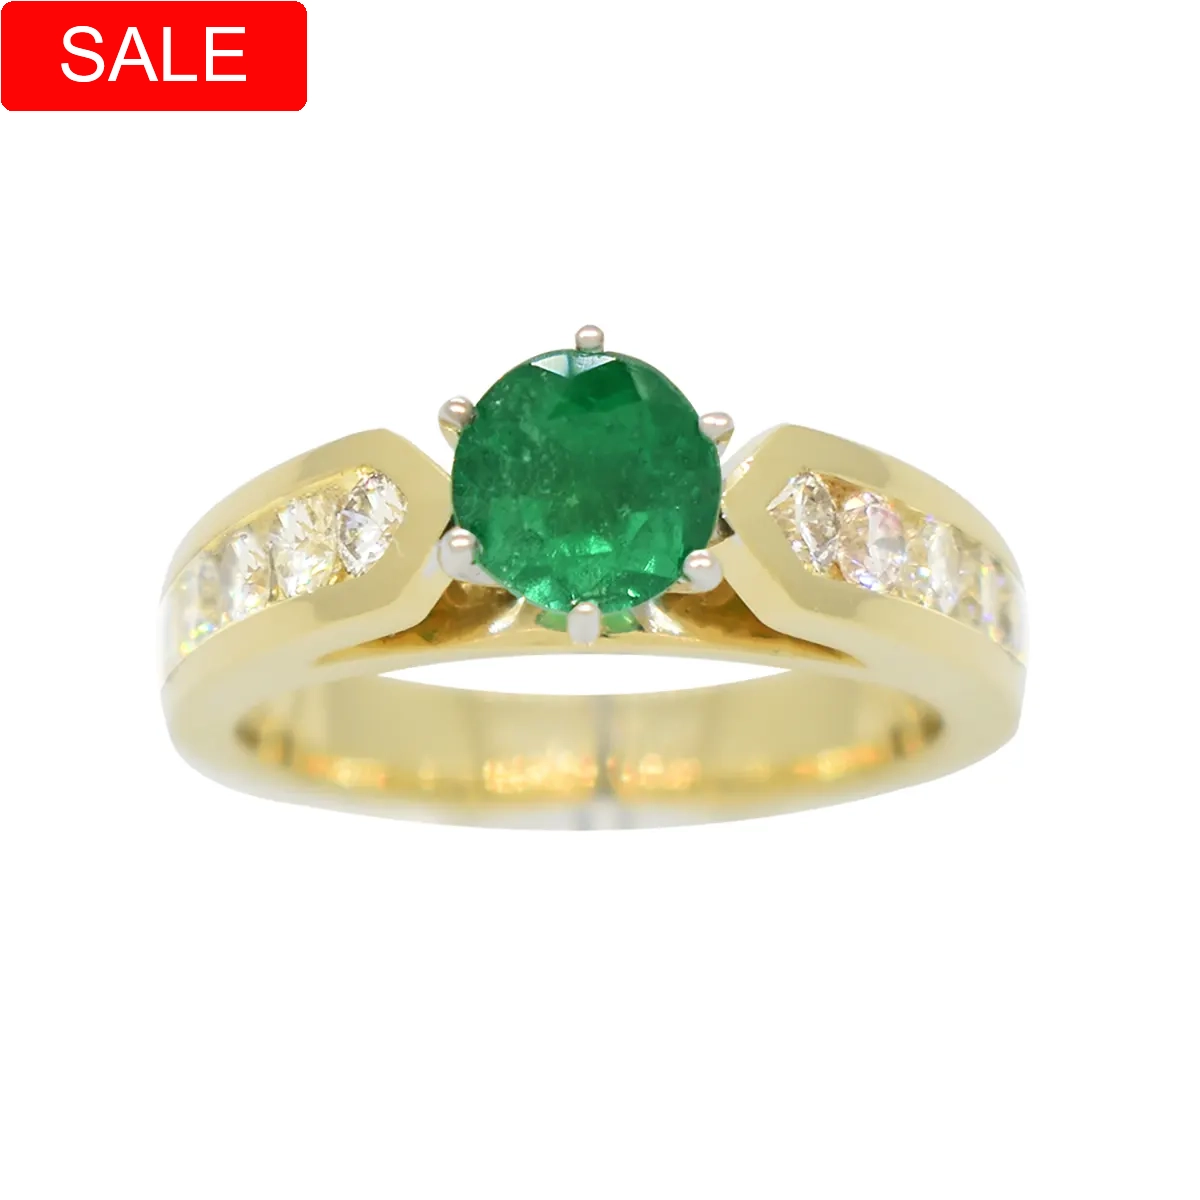 1.05 Carats Natural Colombian Emerald Engagement Ring with Diamonds